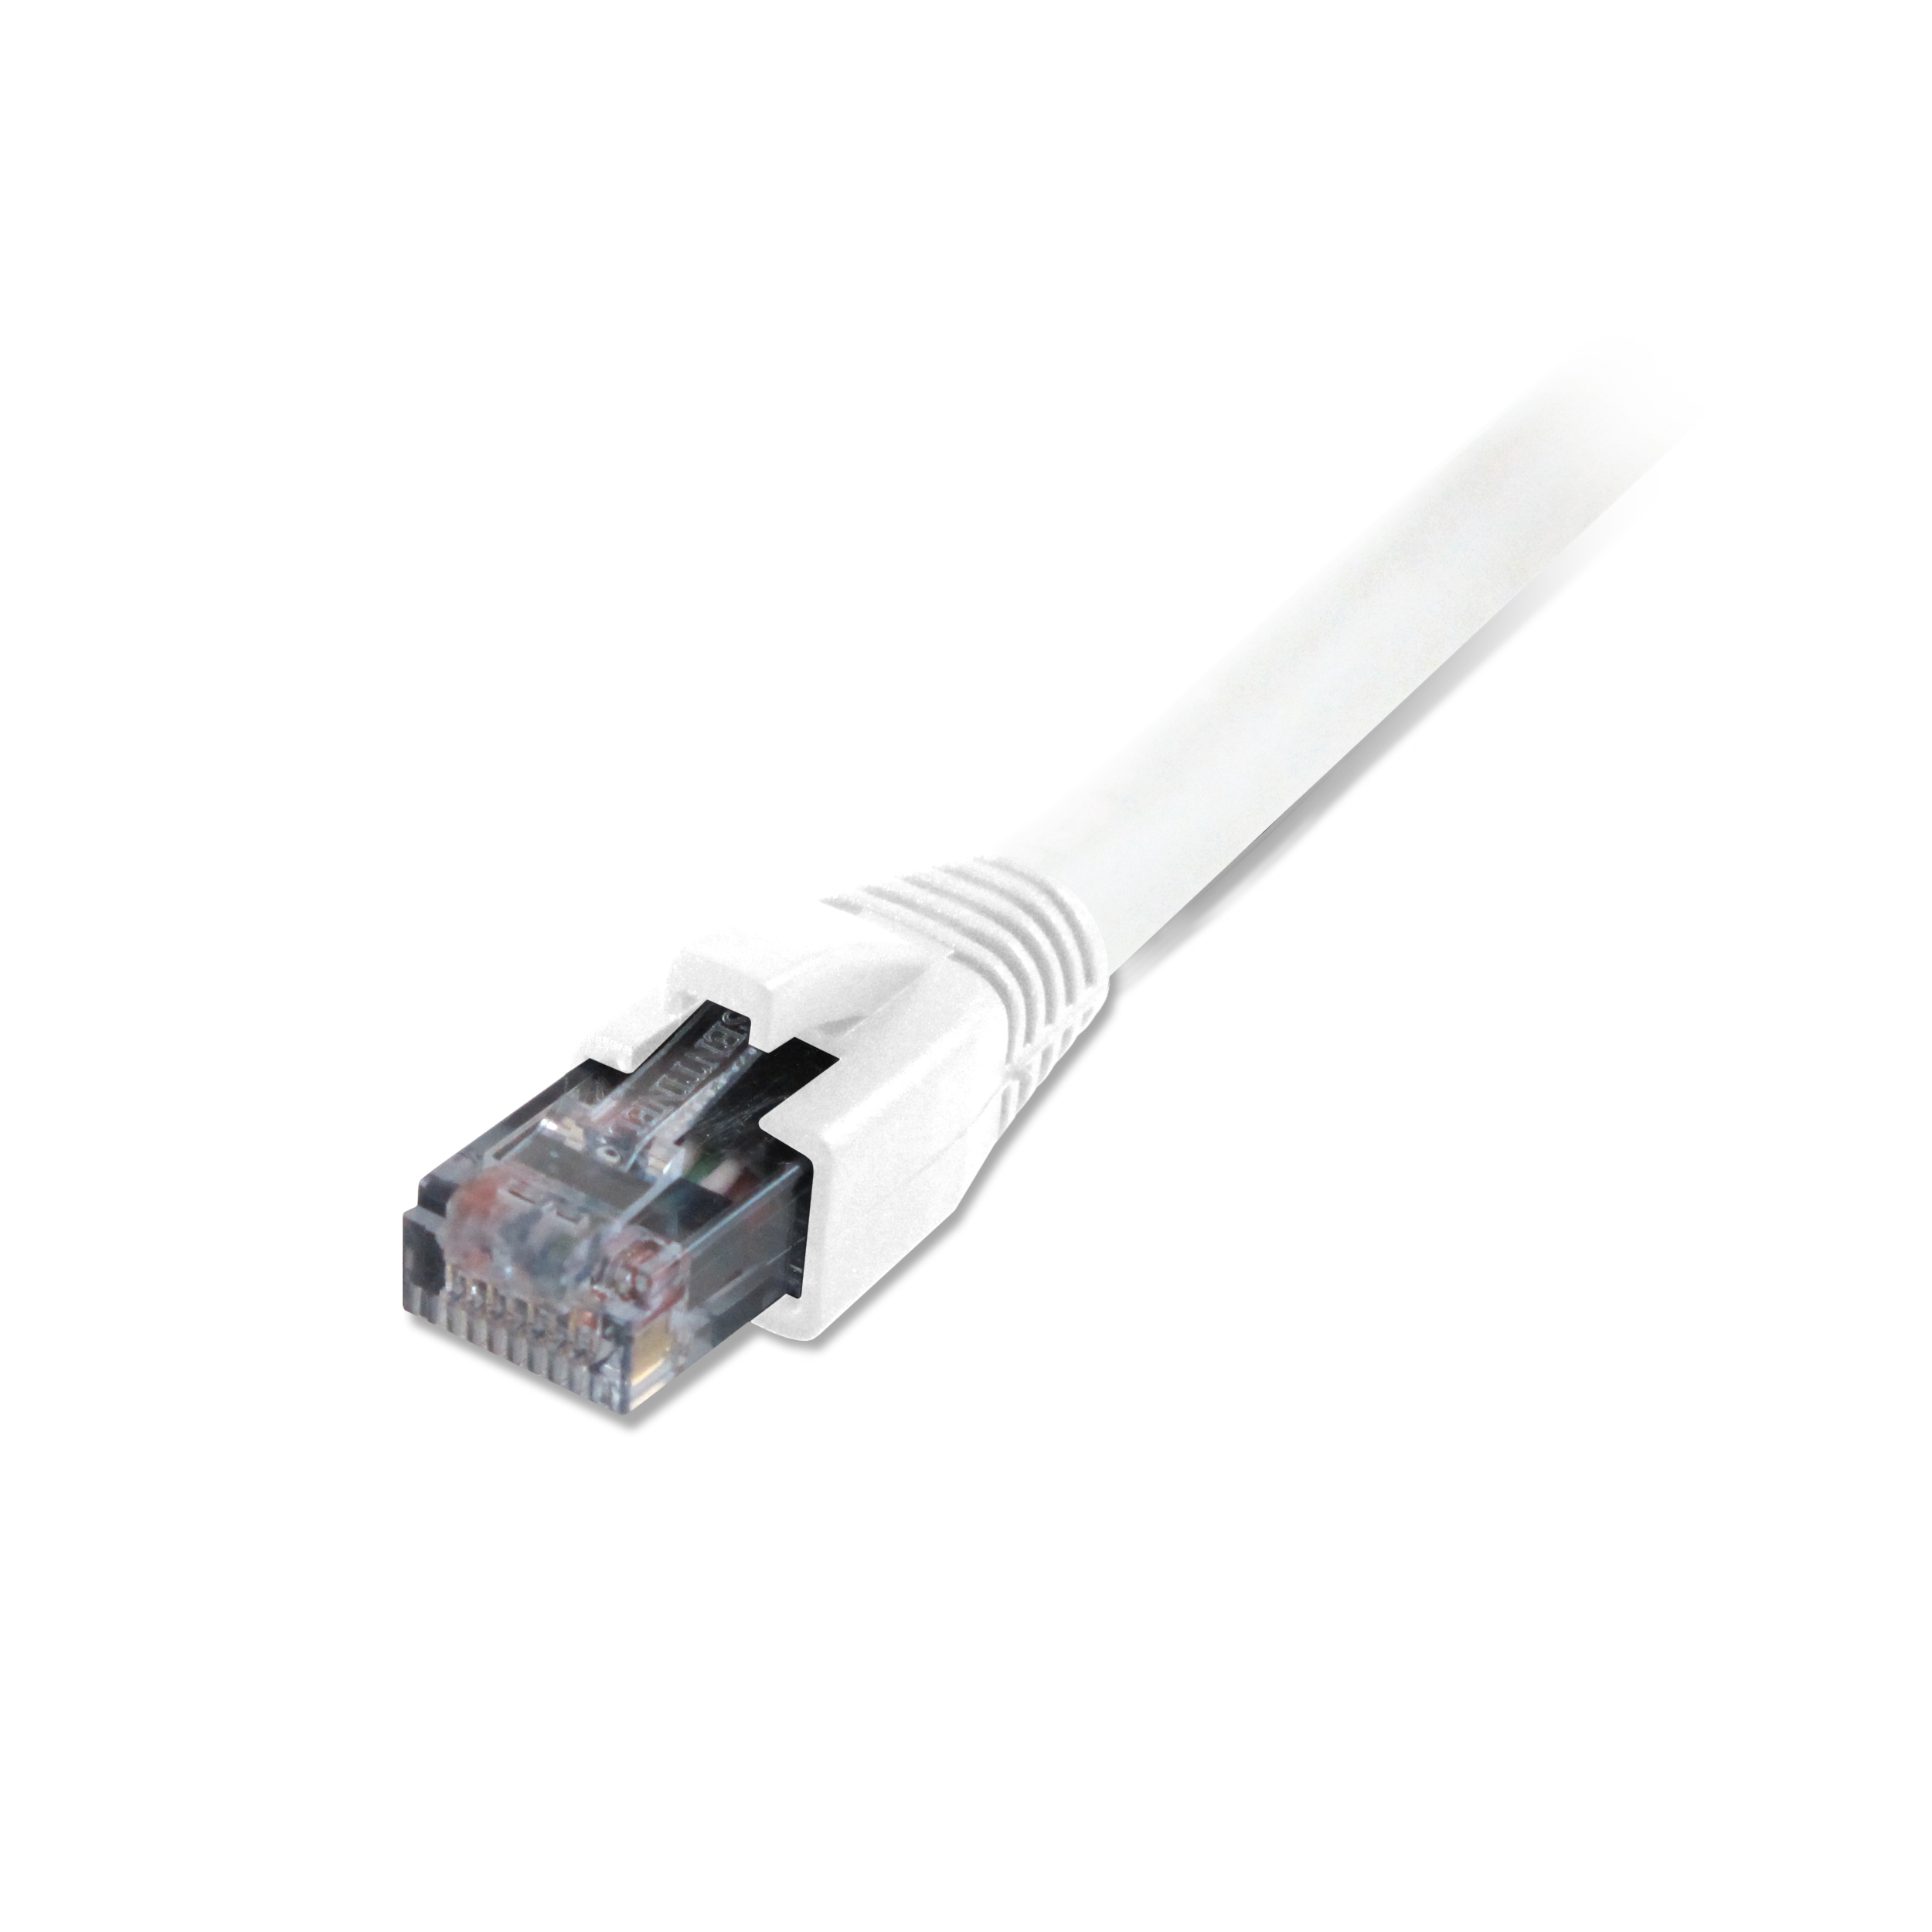 Comprehensive CAT5-350-1WHT Cat5e 350 Mhz Snagless Patch Cable 1ft White